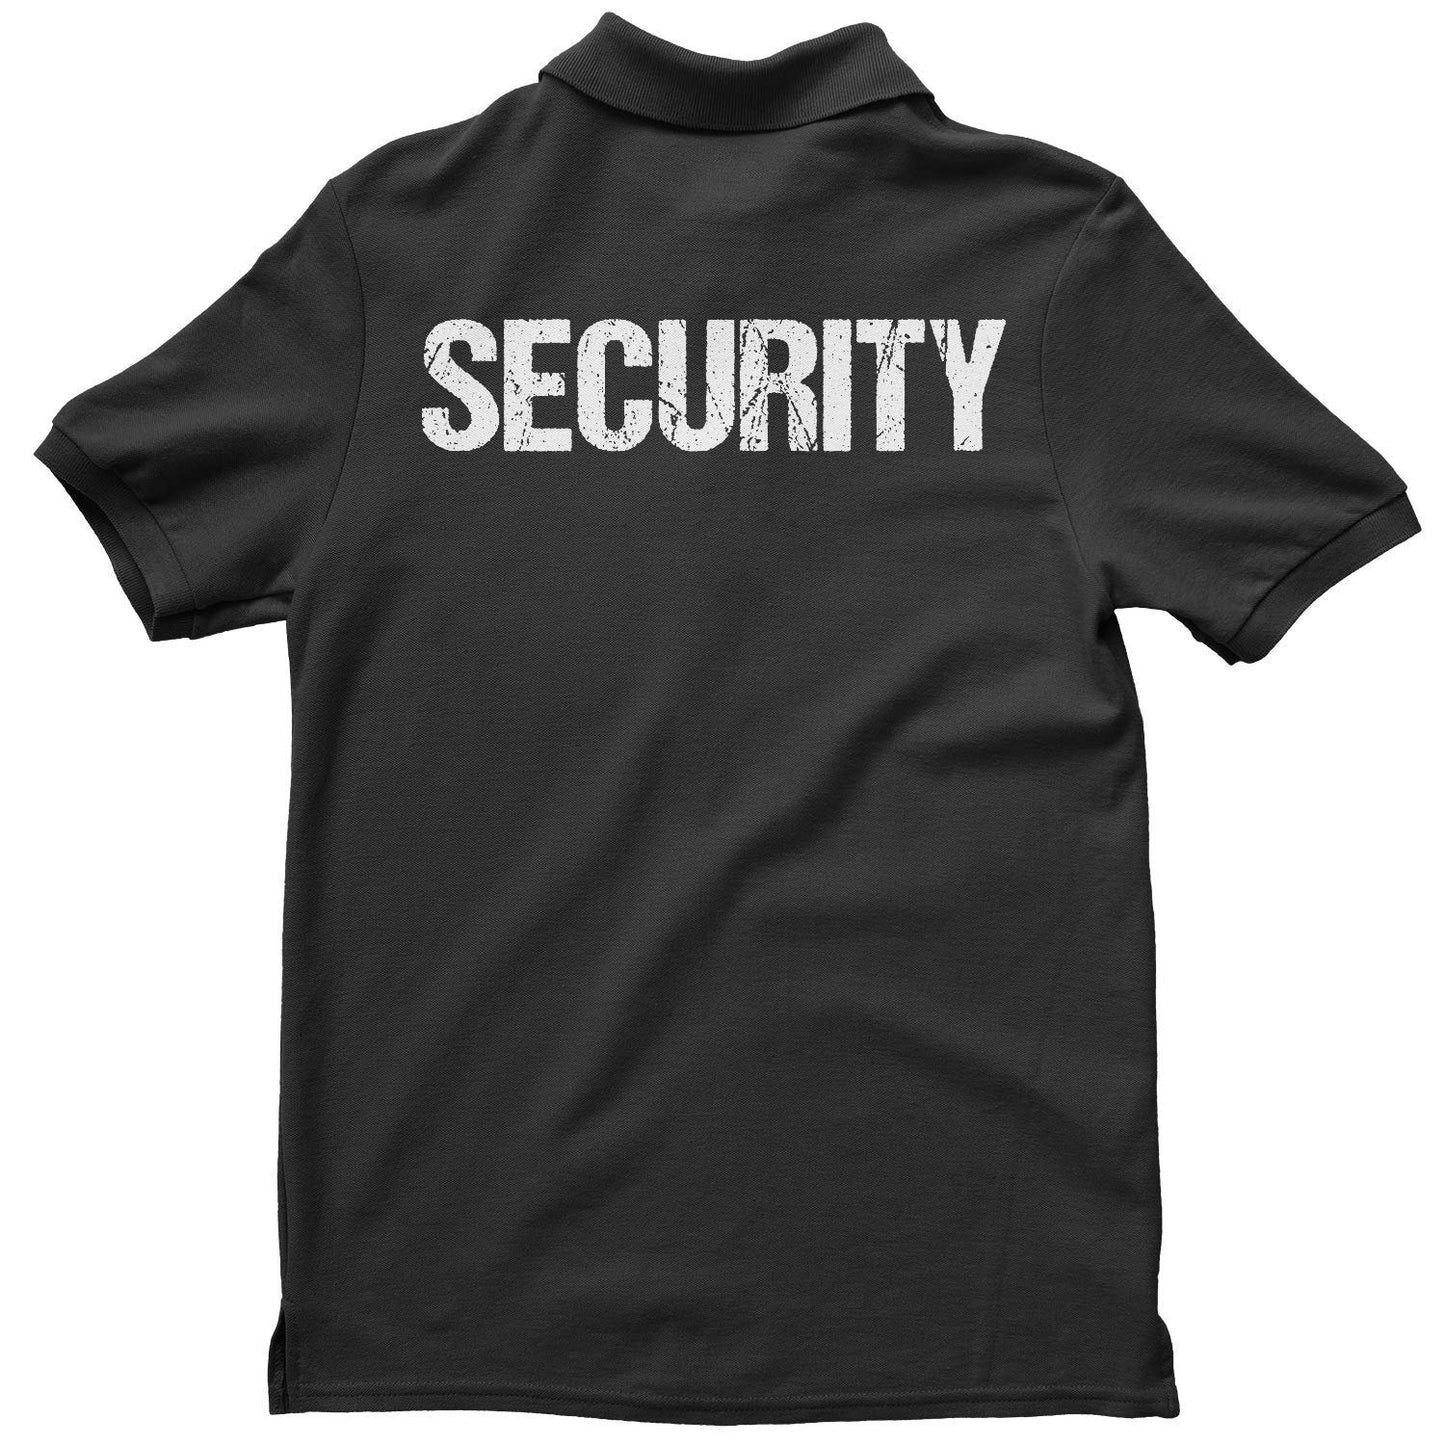 Security Polo Shirt Distressed Front Back Print Mens Tee Staff Event Uniform Bouncer Screen Printed